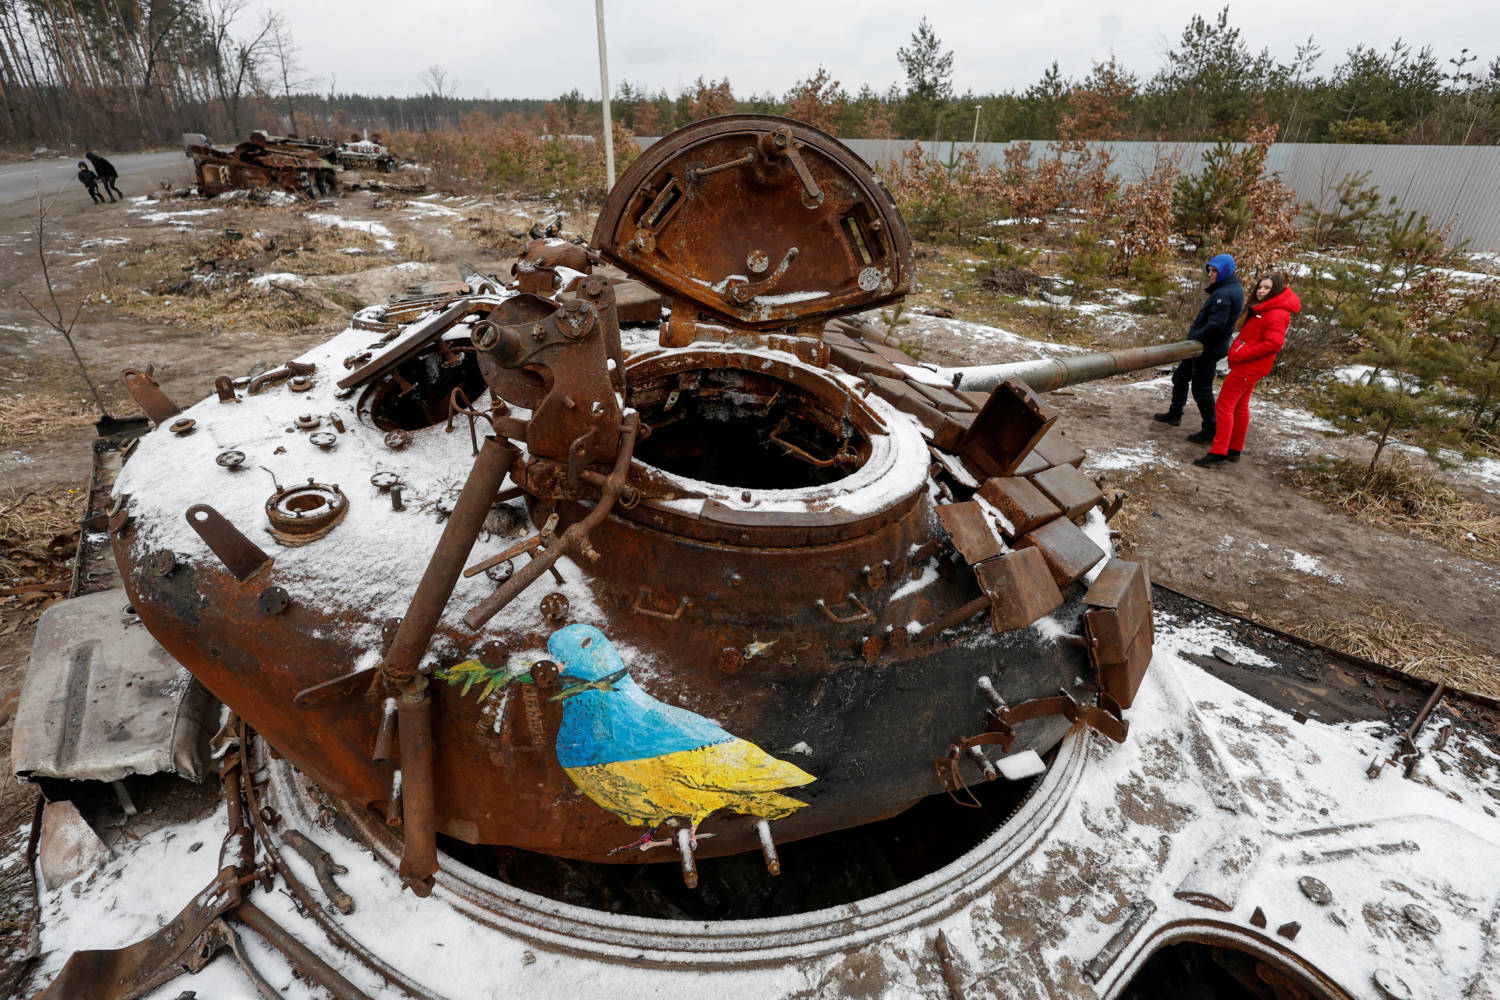 Artwork Of The Famous Street Artist Tvboy Is Seen On A Destroyed Russian Tank In The Village Of Dmytrivka, Outside Kyiv